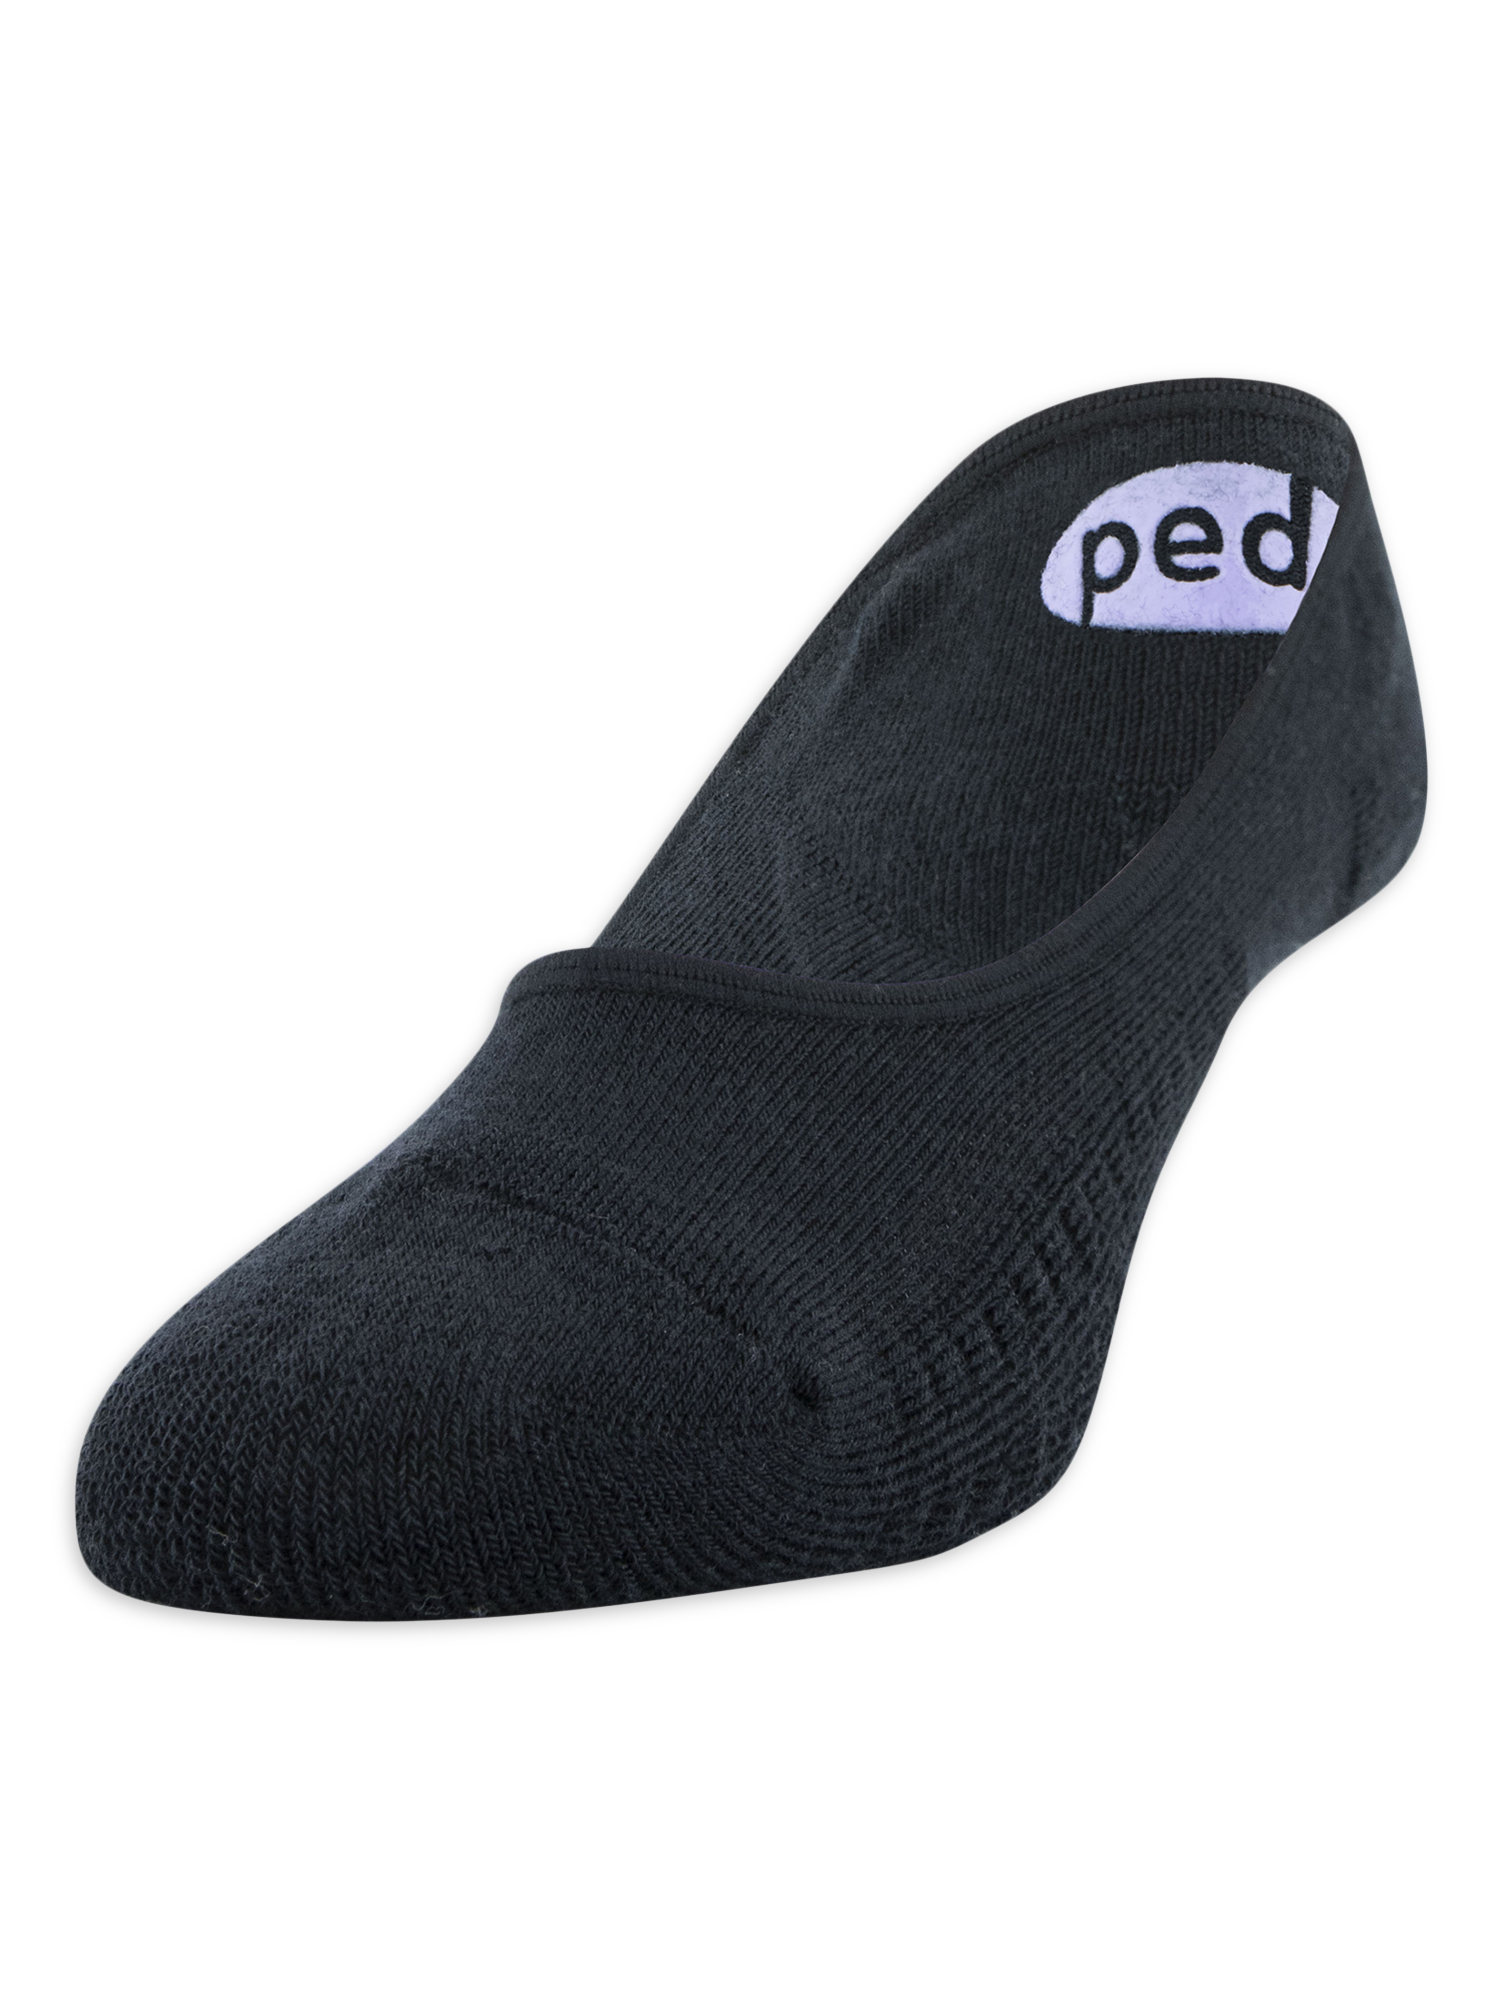 PEDS Women's Cushion Low Cut No Show Liner Socks, Shoe Sizes 5-10 and 8 ...